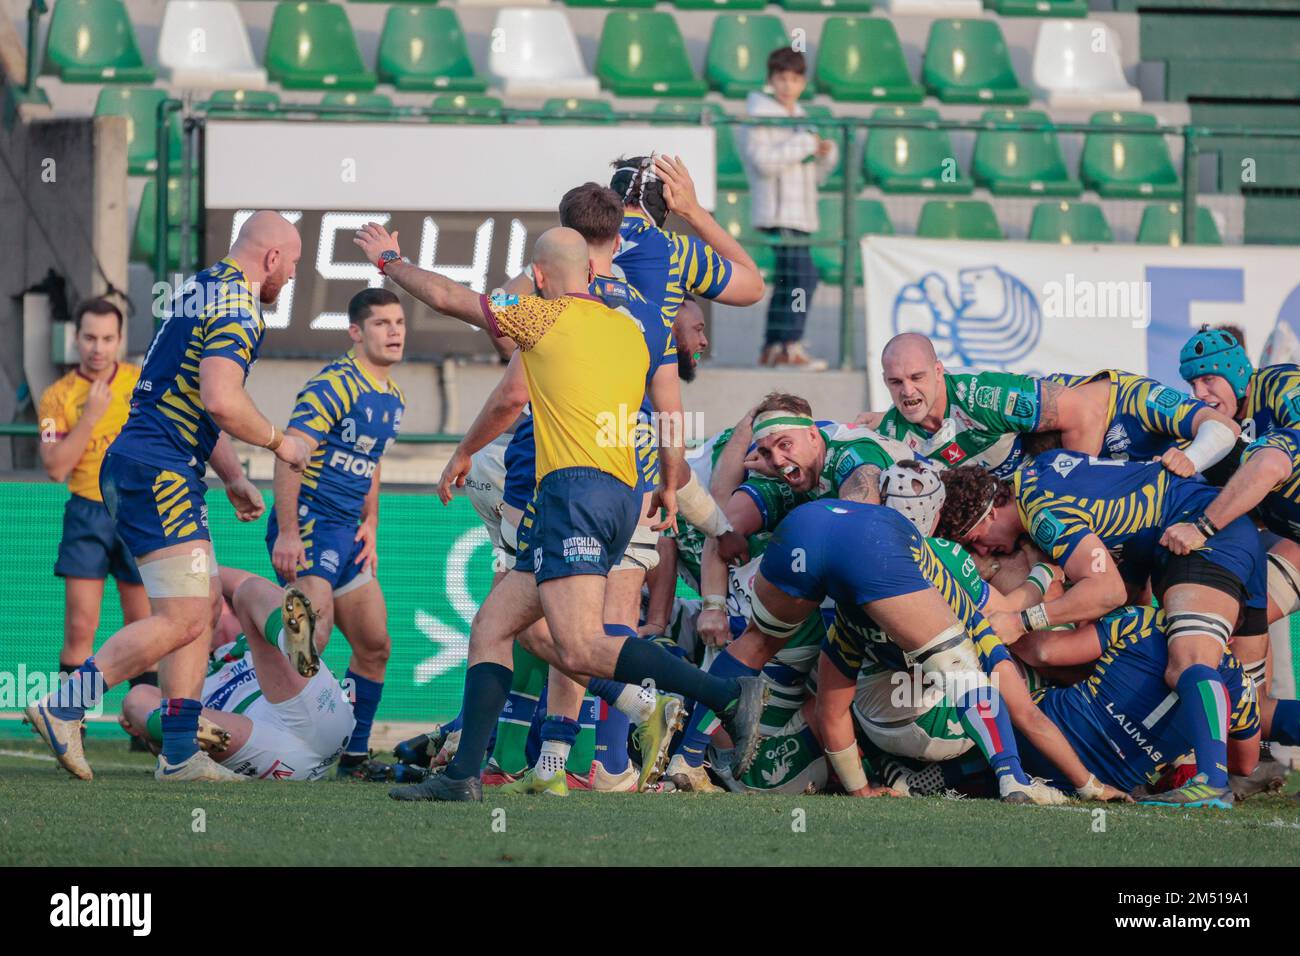 Treviso, Italia. 24th Dec, 2022. Benetton Happiness durante Benetton Rugby vs Zebre Rugby Club, United Rugby Championship match a Treviso, Italia, Dicembre 24 2022 Credit: Independent Photo Agency/Alamy Live News Foto Stock